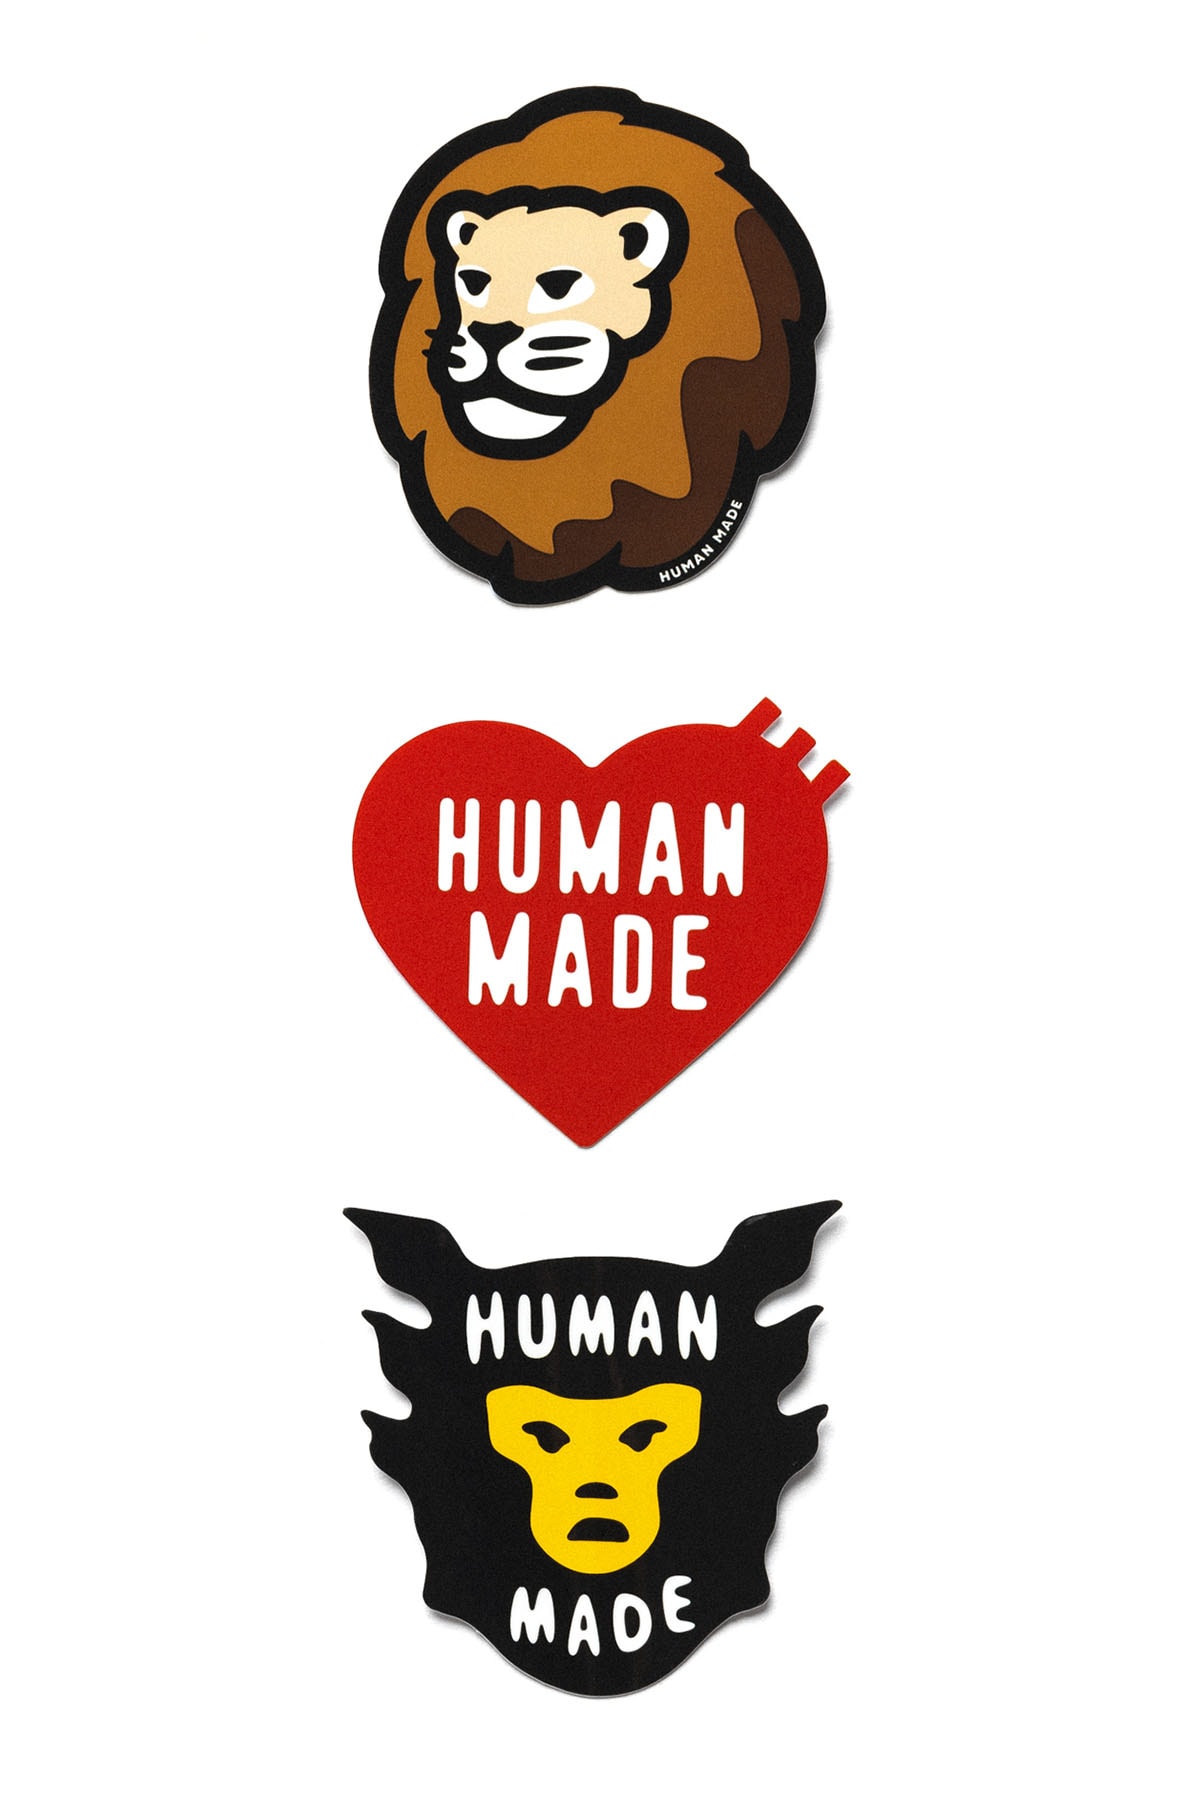 HBX からニゴーの手掛けるヒューマンメイドとの限定コラボTシャツの新色が登場　HUMAN MADE and HBX are collaborating again on a new limited edition black tram t-shirt